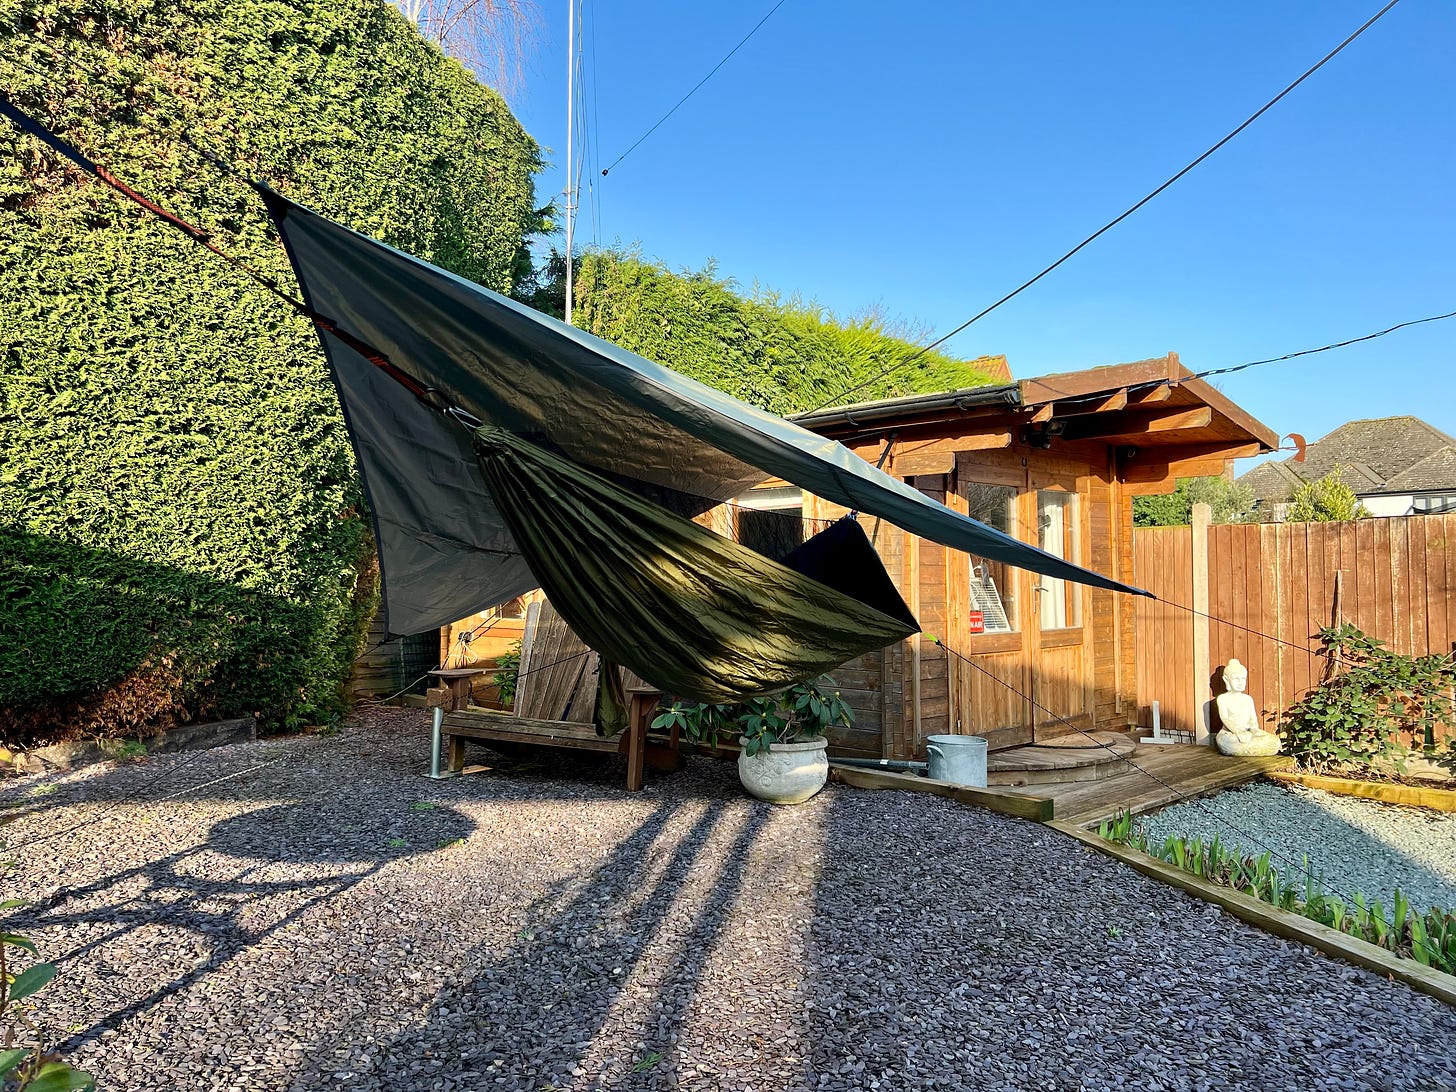 A camping hammock hangs by my shed